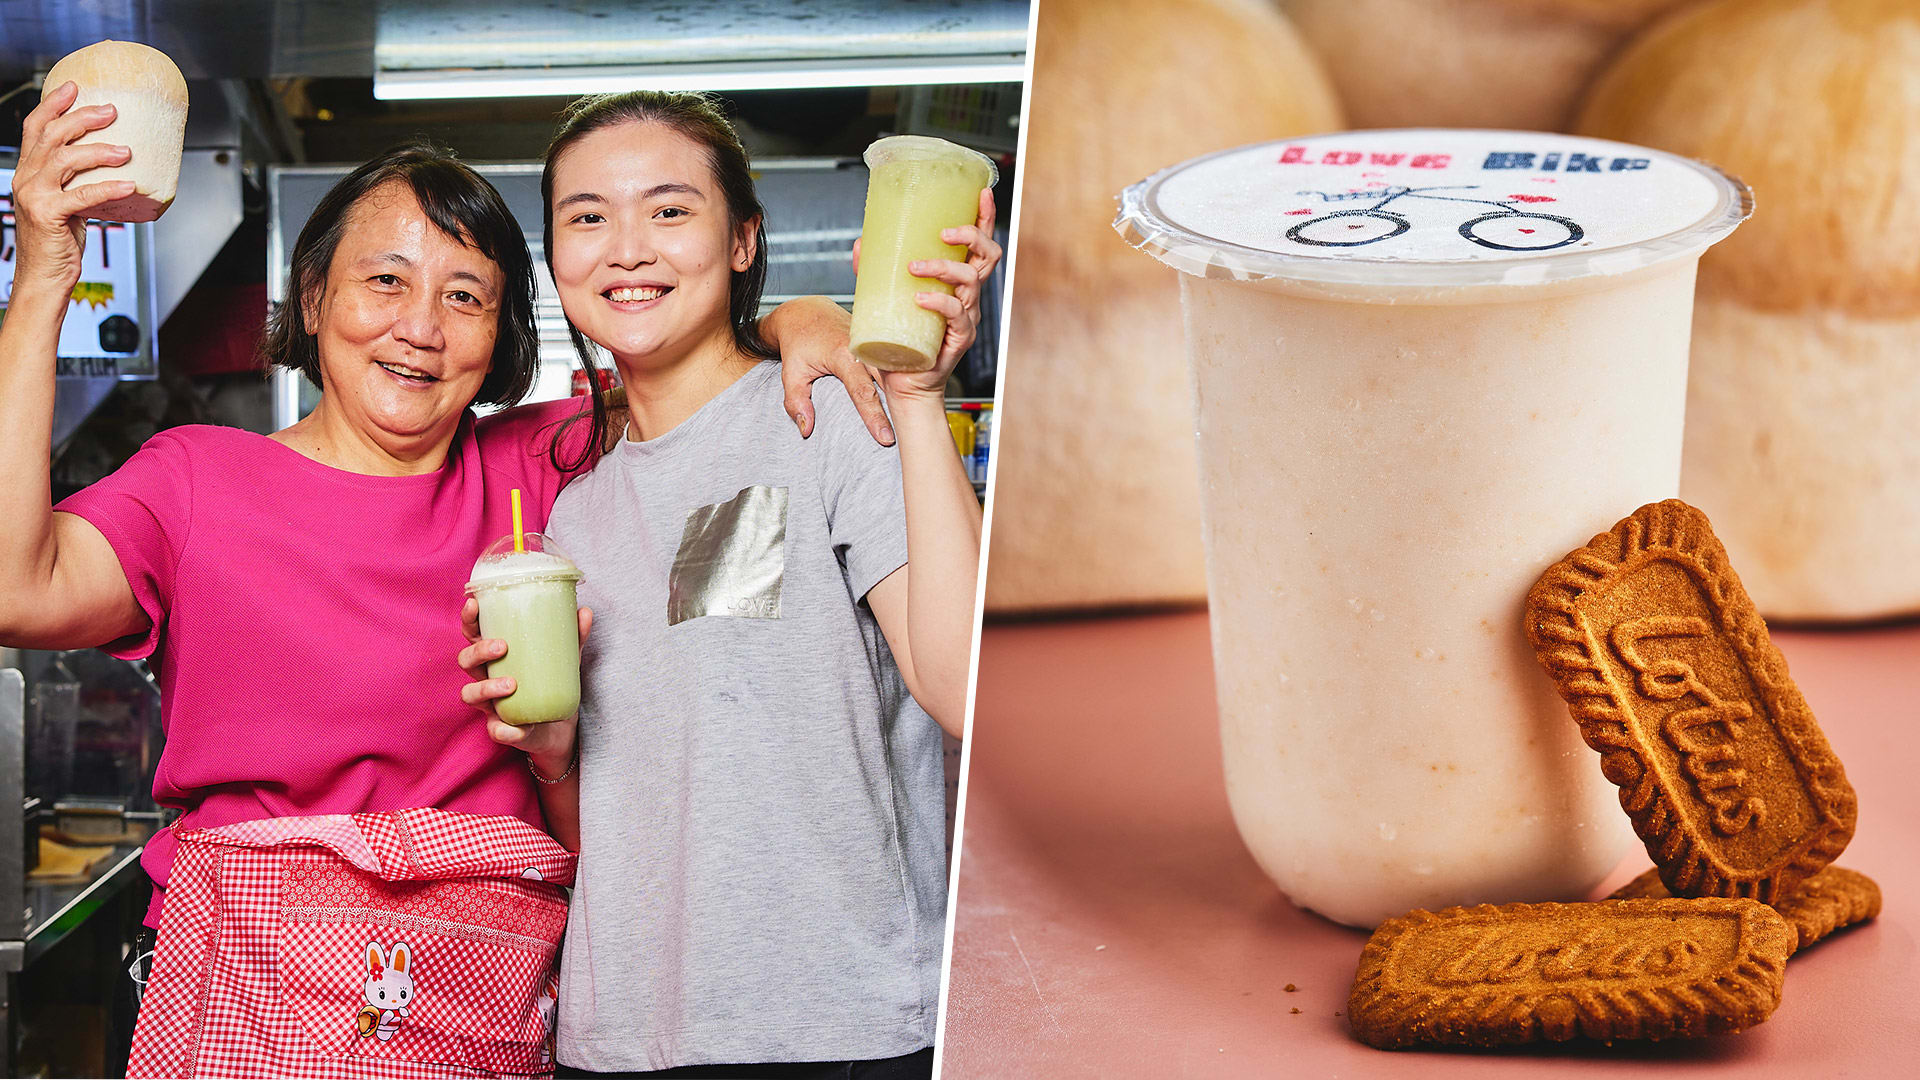 Coconut Shakes From $3.50 At Toa Payoh Hawker Stall By Mother-Daughter Team